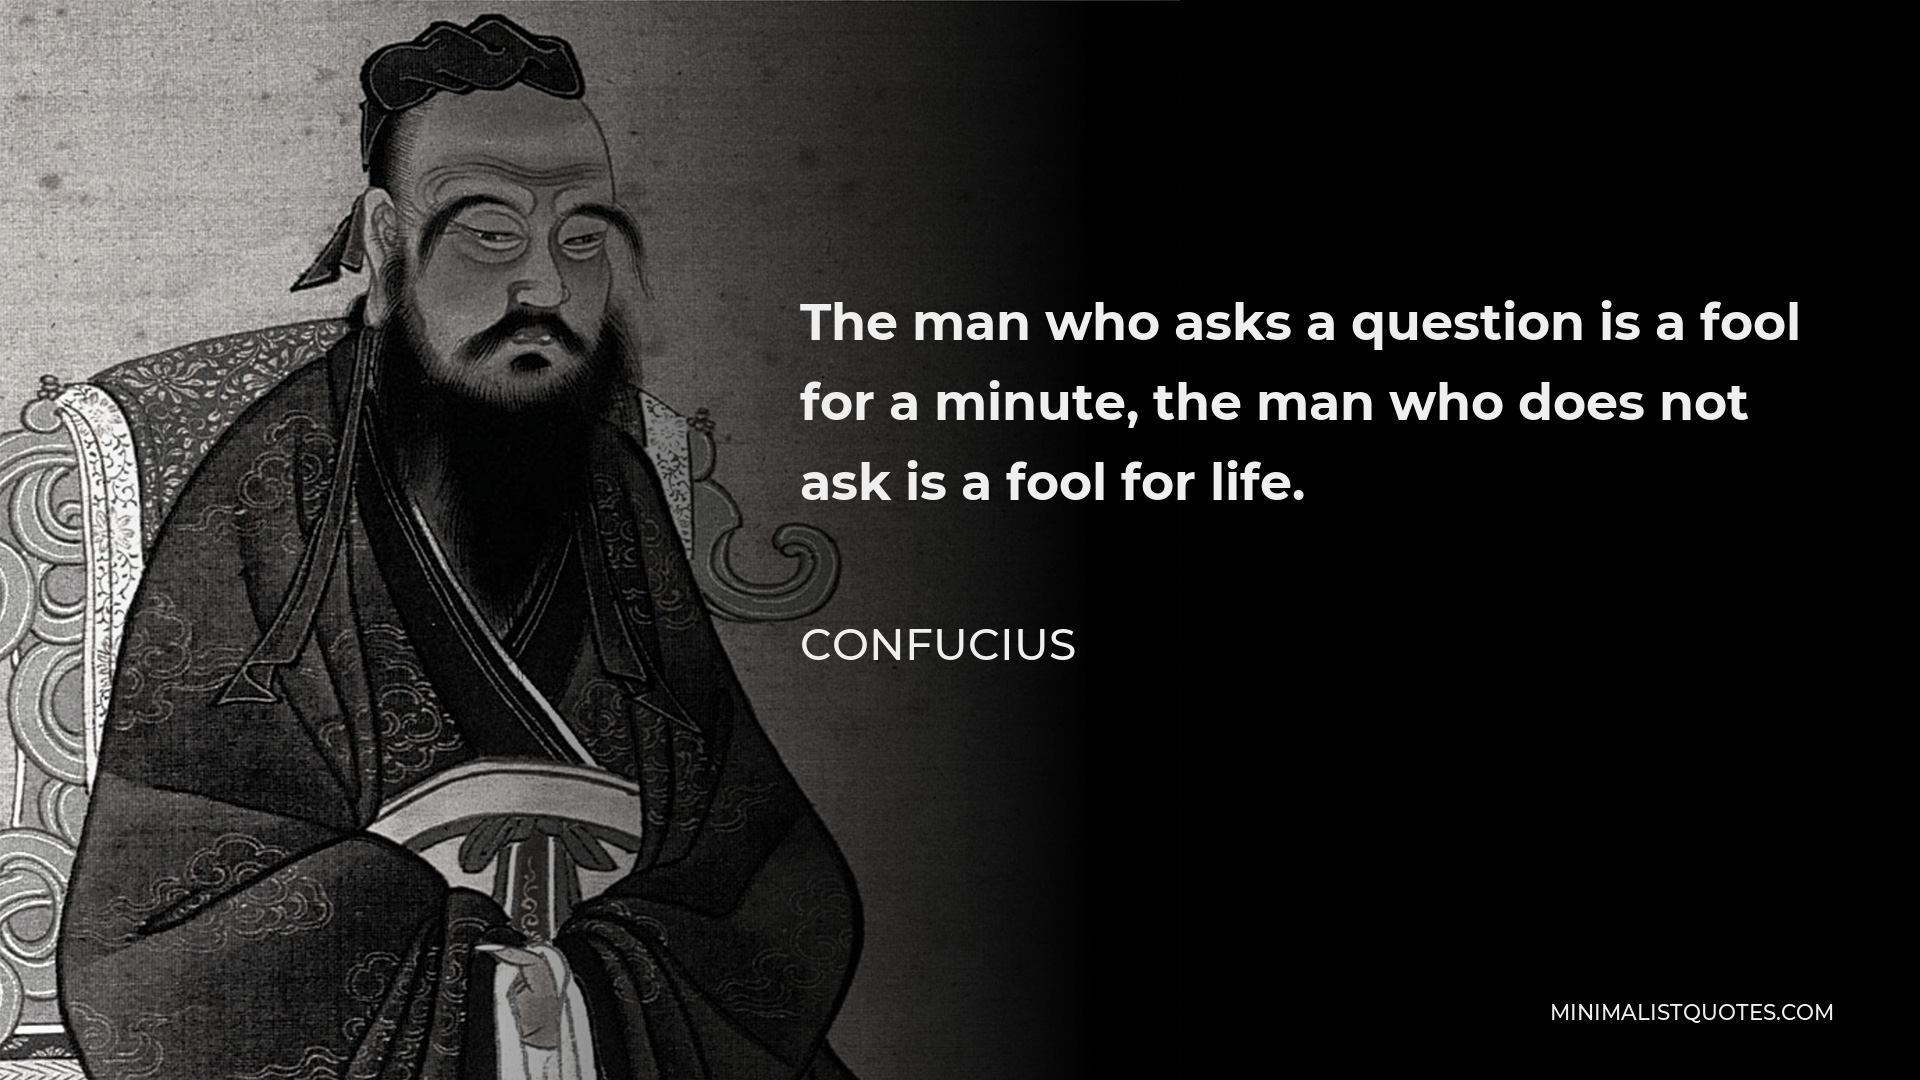 Confucius Quote - The man who asks a question is a fool for a minute, the man who does not ask is a fool for life.